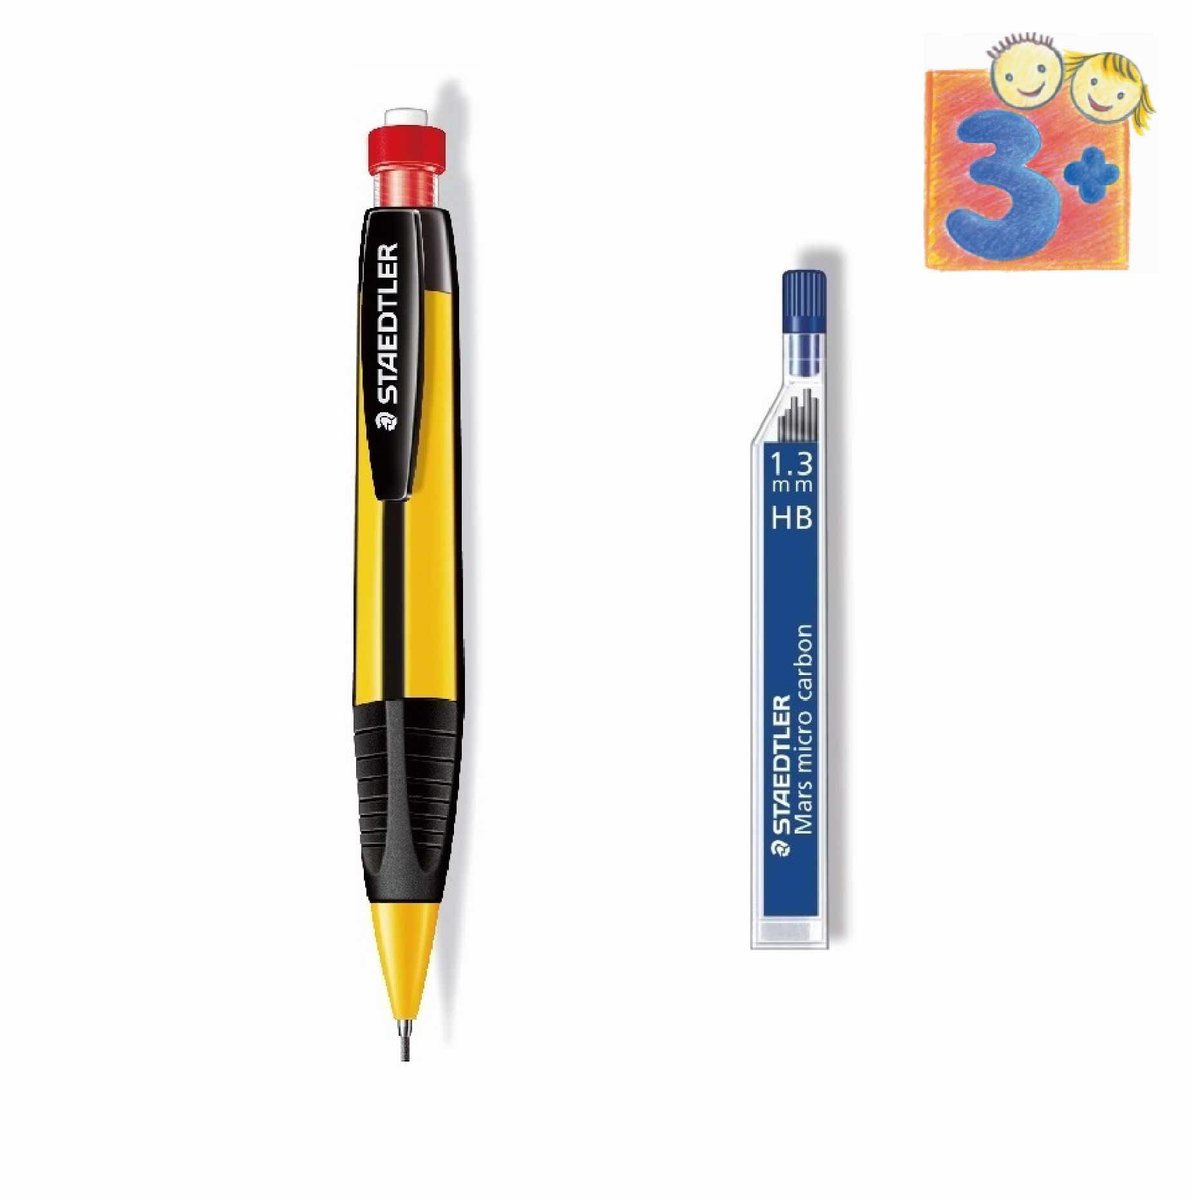 STAEDTLER 771 LARGE YELLOW MECHANICAL PENCIL 1.3MM LEAD BRAND NEW 